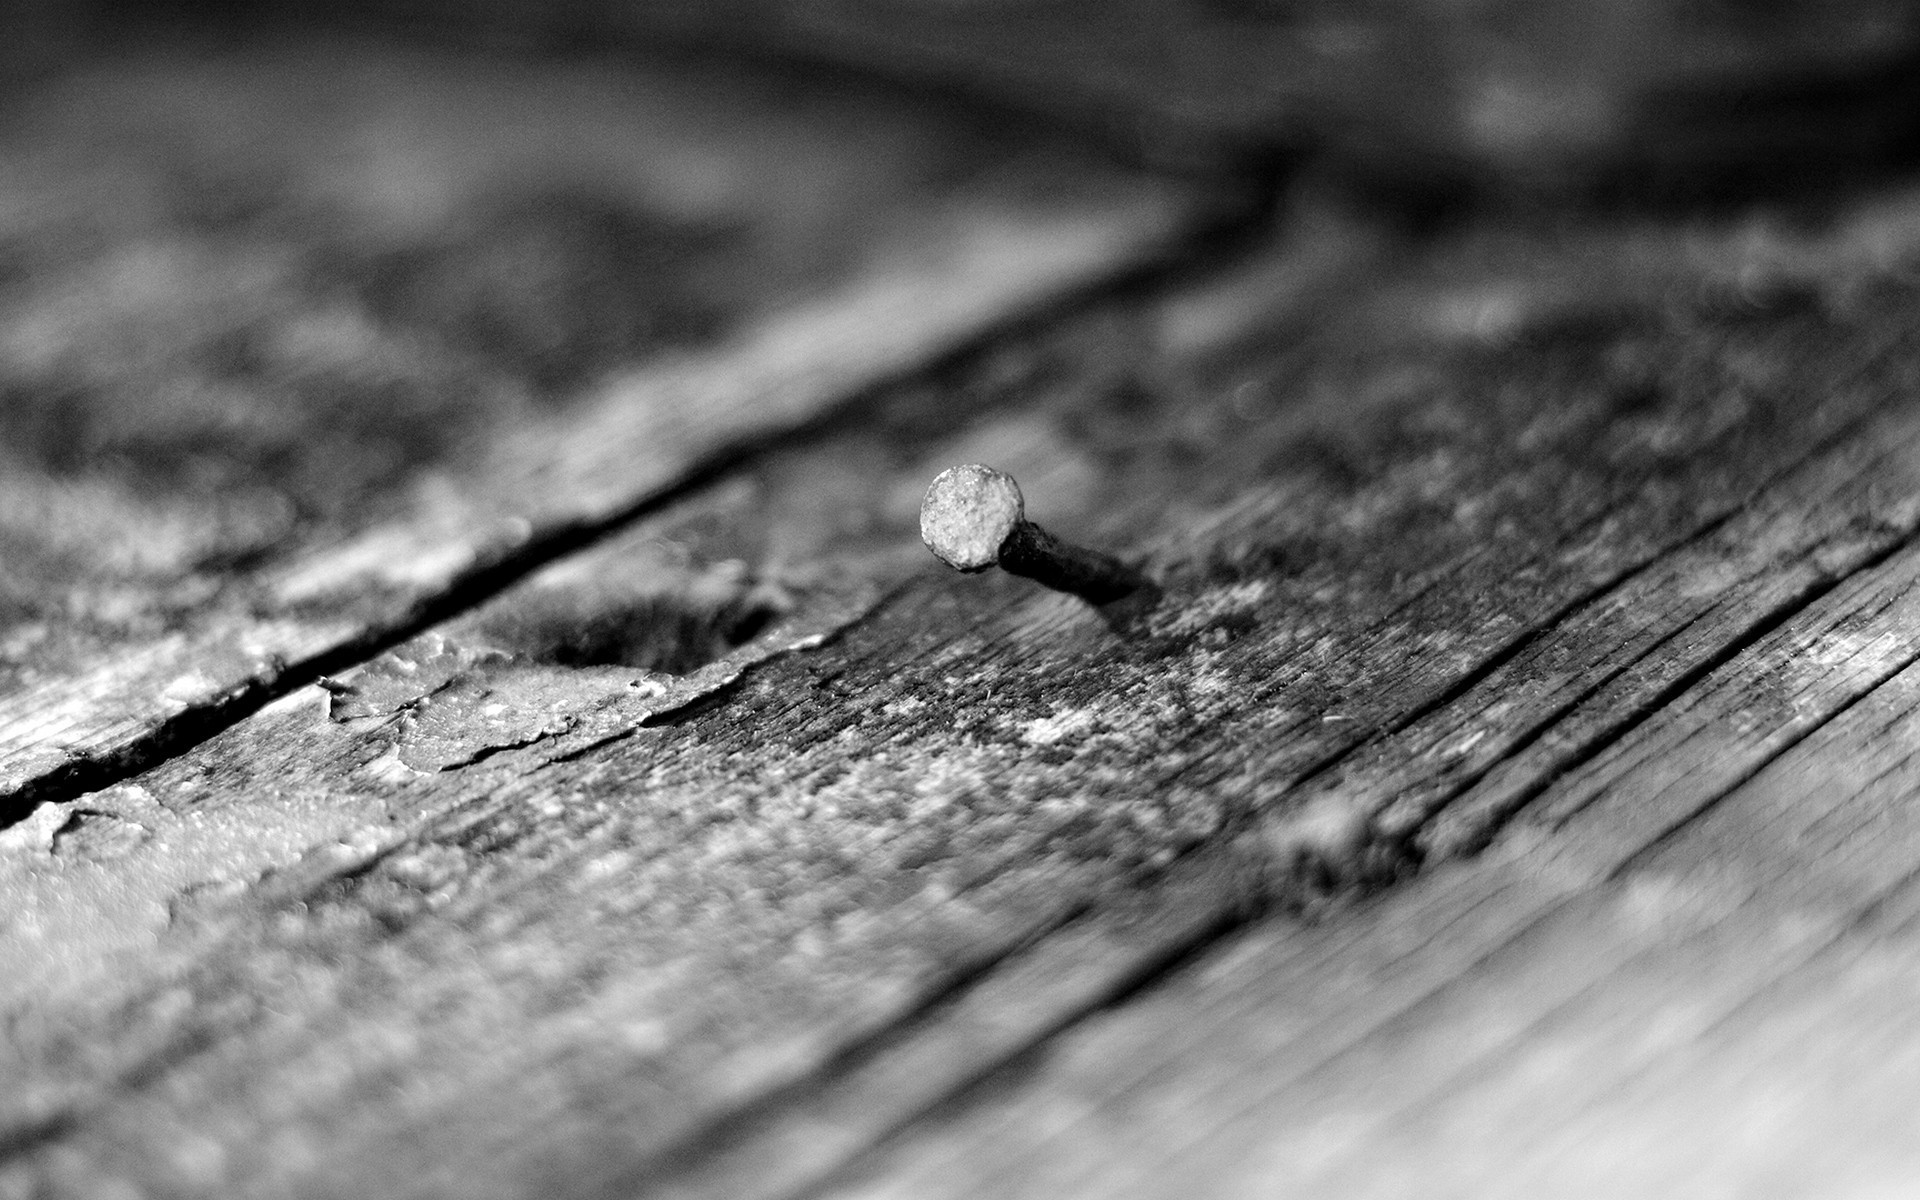 monochrome, Nails, Wood, Texture, Macro, Depth Of Field, Photography Wallpaper